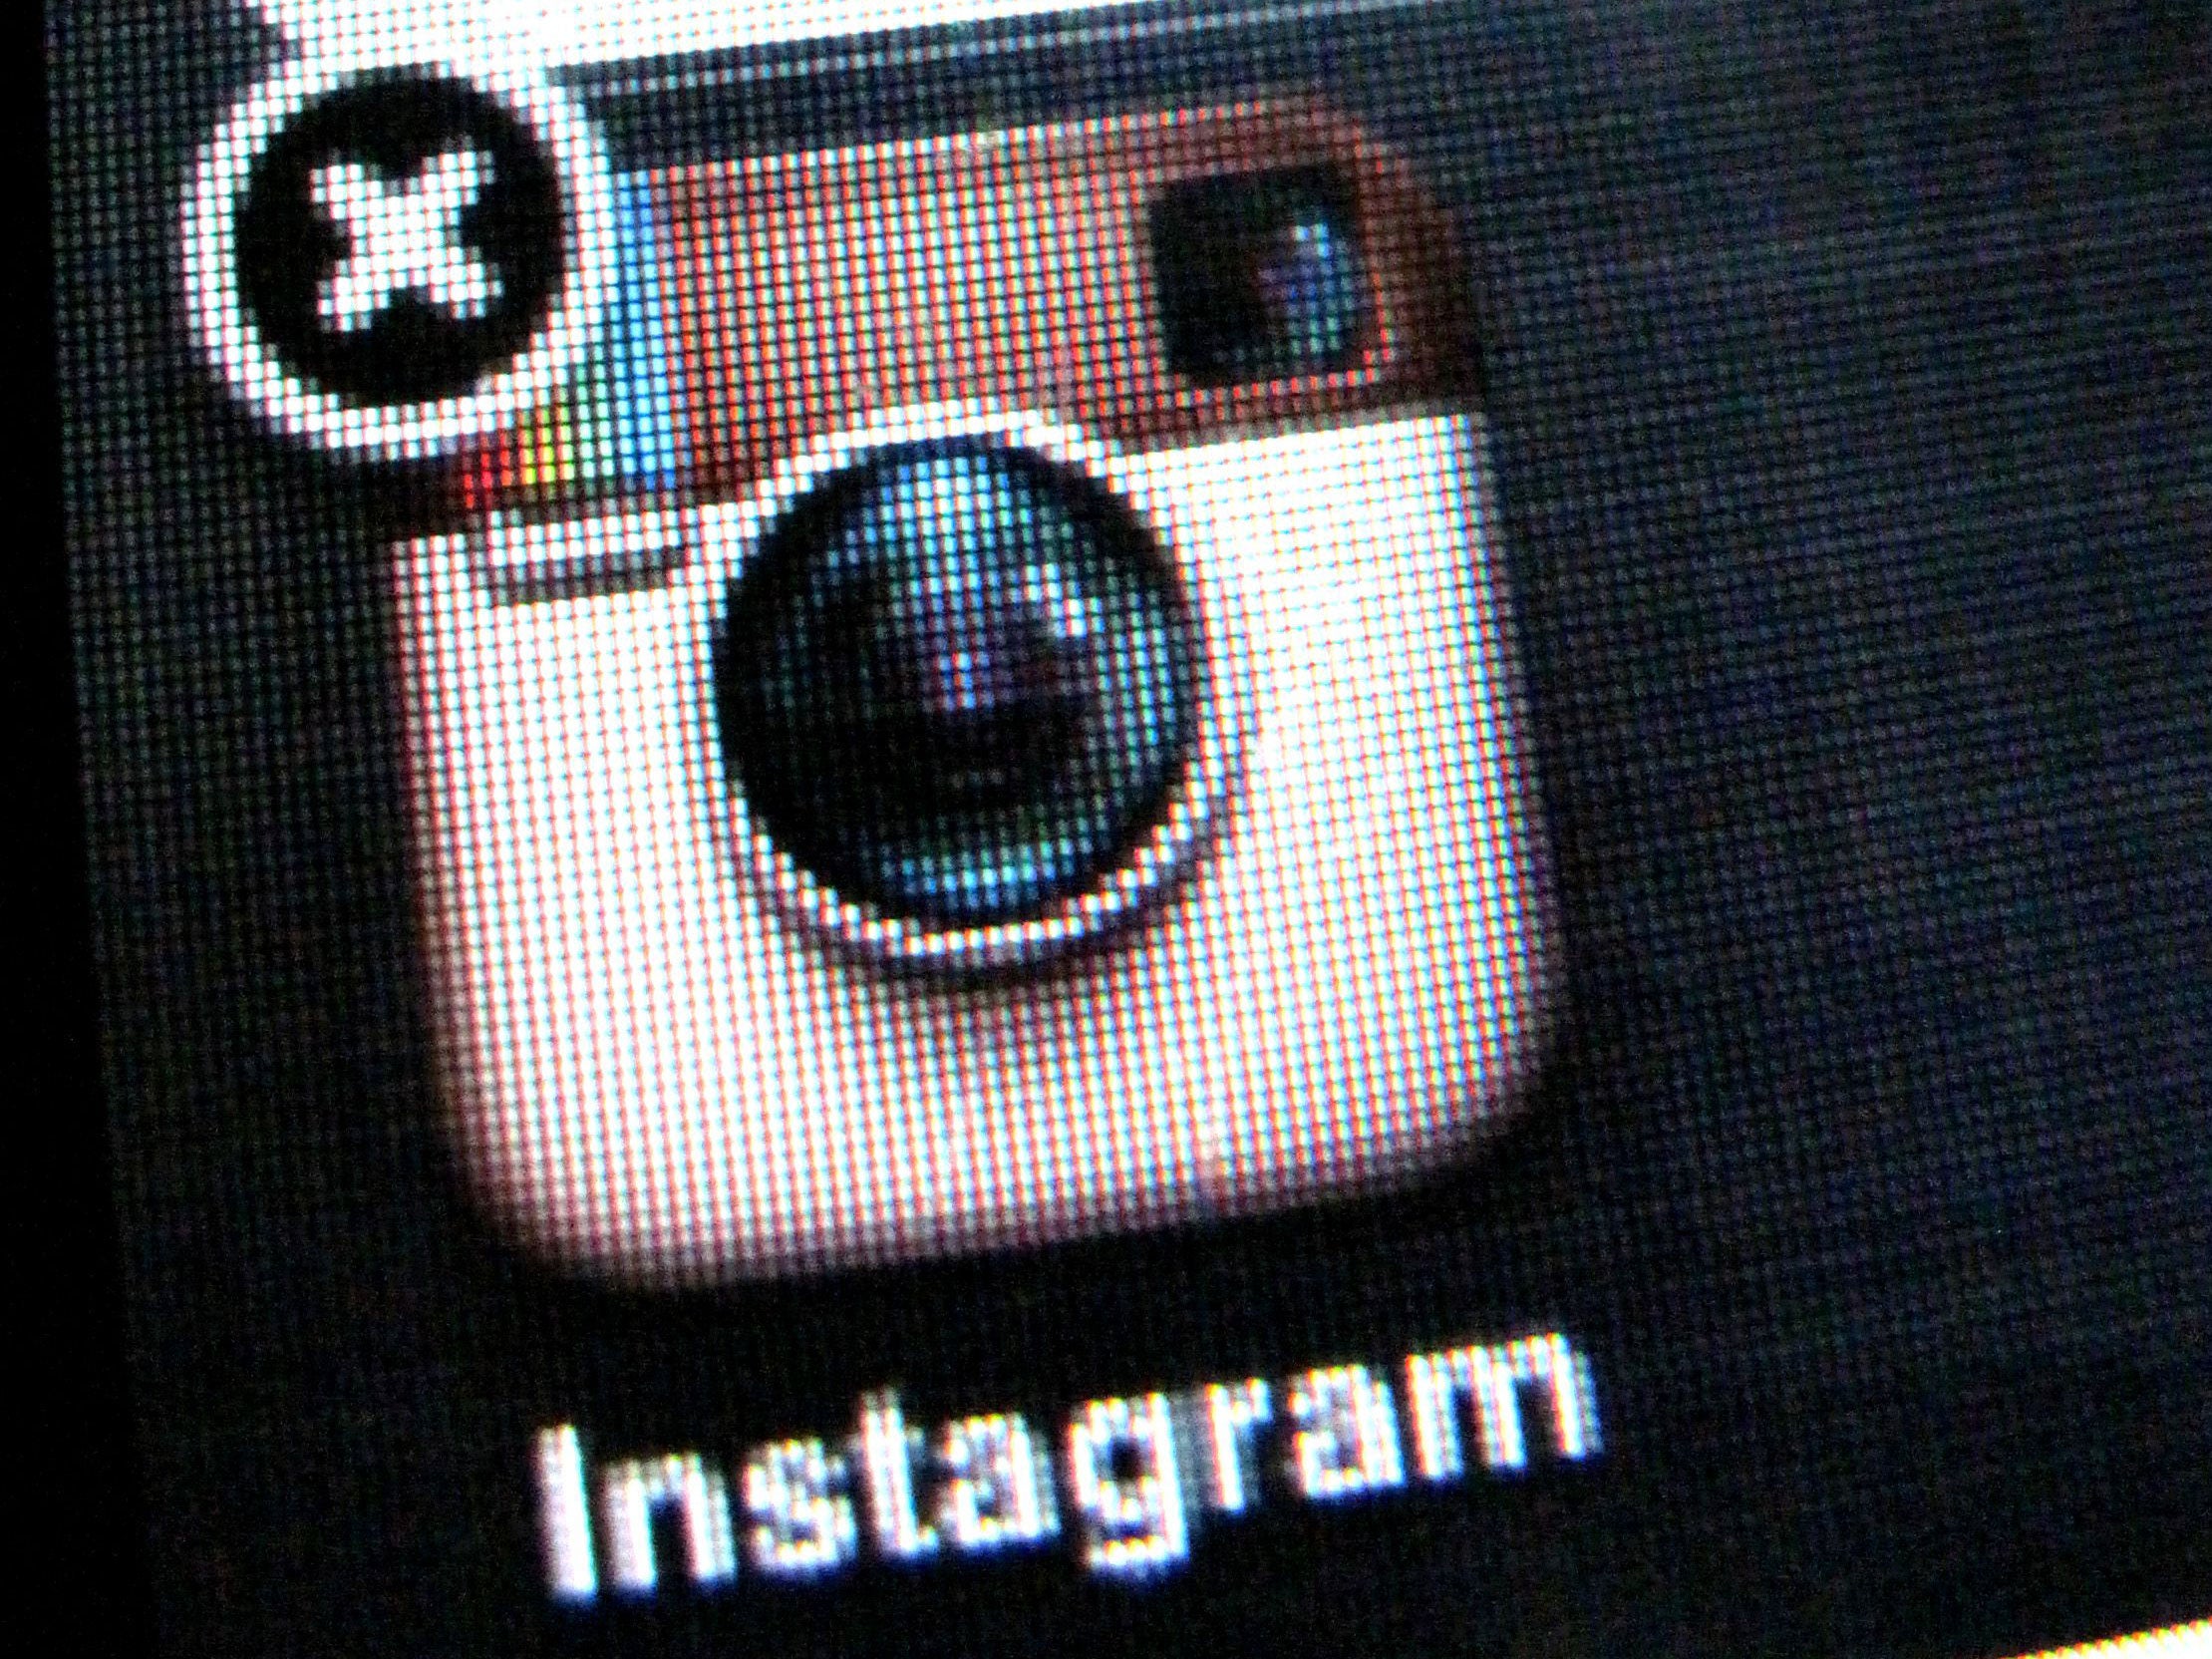 Instagram now has over 152 million users who upload an average total of 65 million photos every day